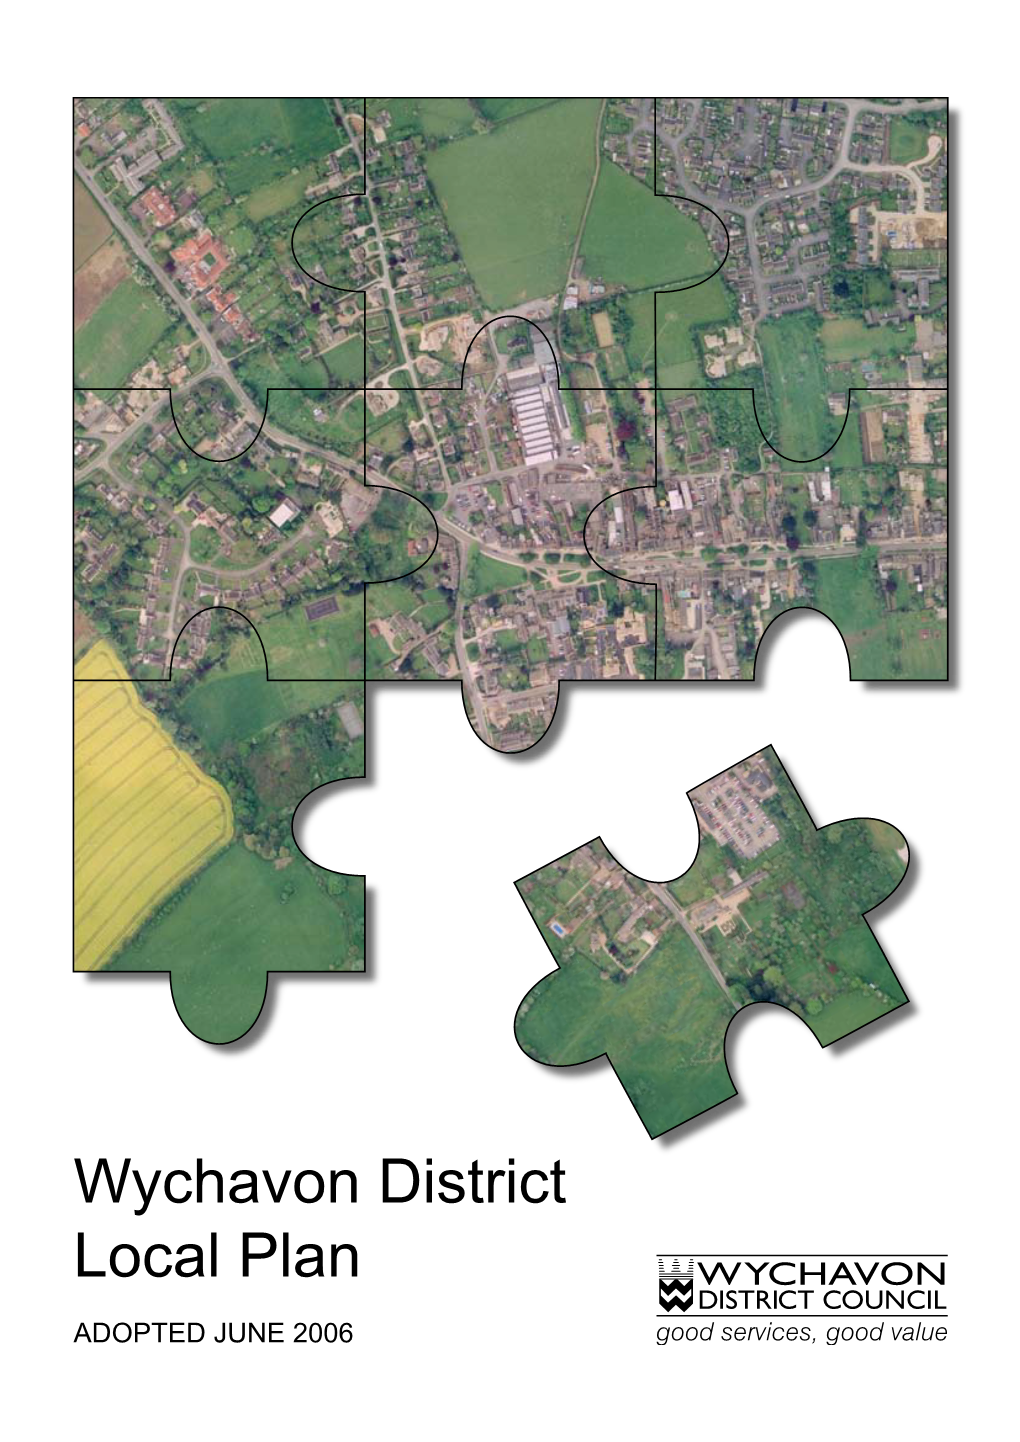 Wychavon District Local Plan ADOPTED JUNE 2006